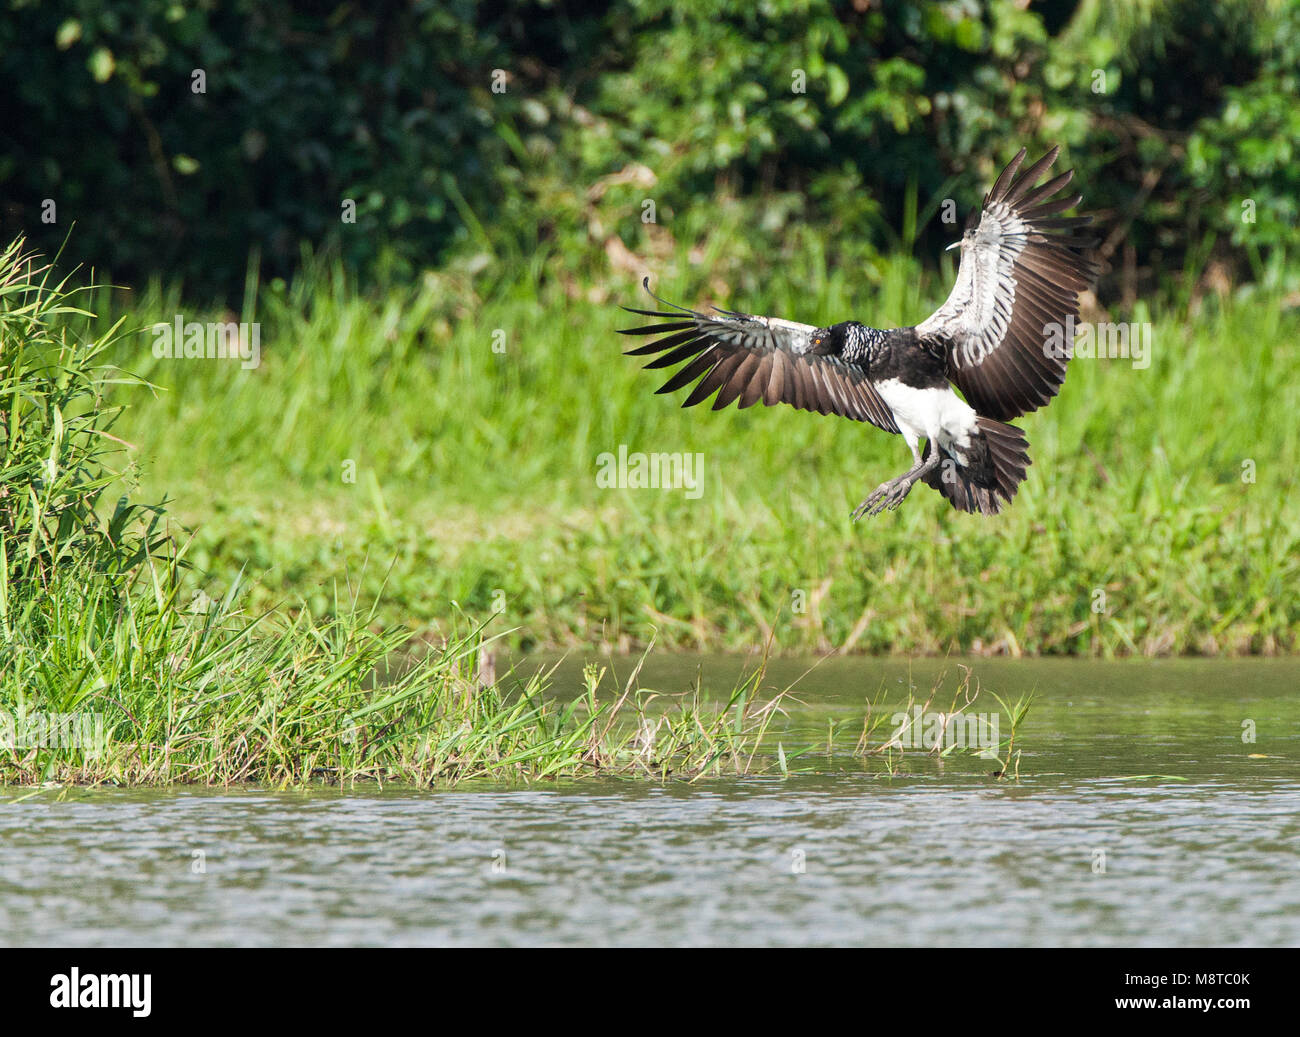 Anioema landend in een Oxbow ; Landing Horned Screamer (Anhima cornuta) dans un lac d'Oxbow péruvienne Banque D'Images